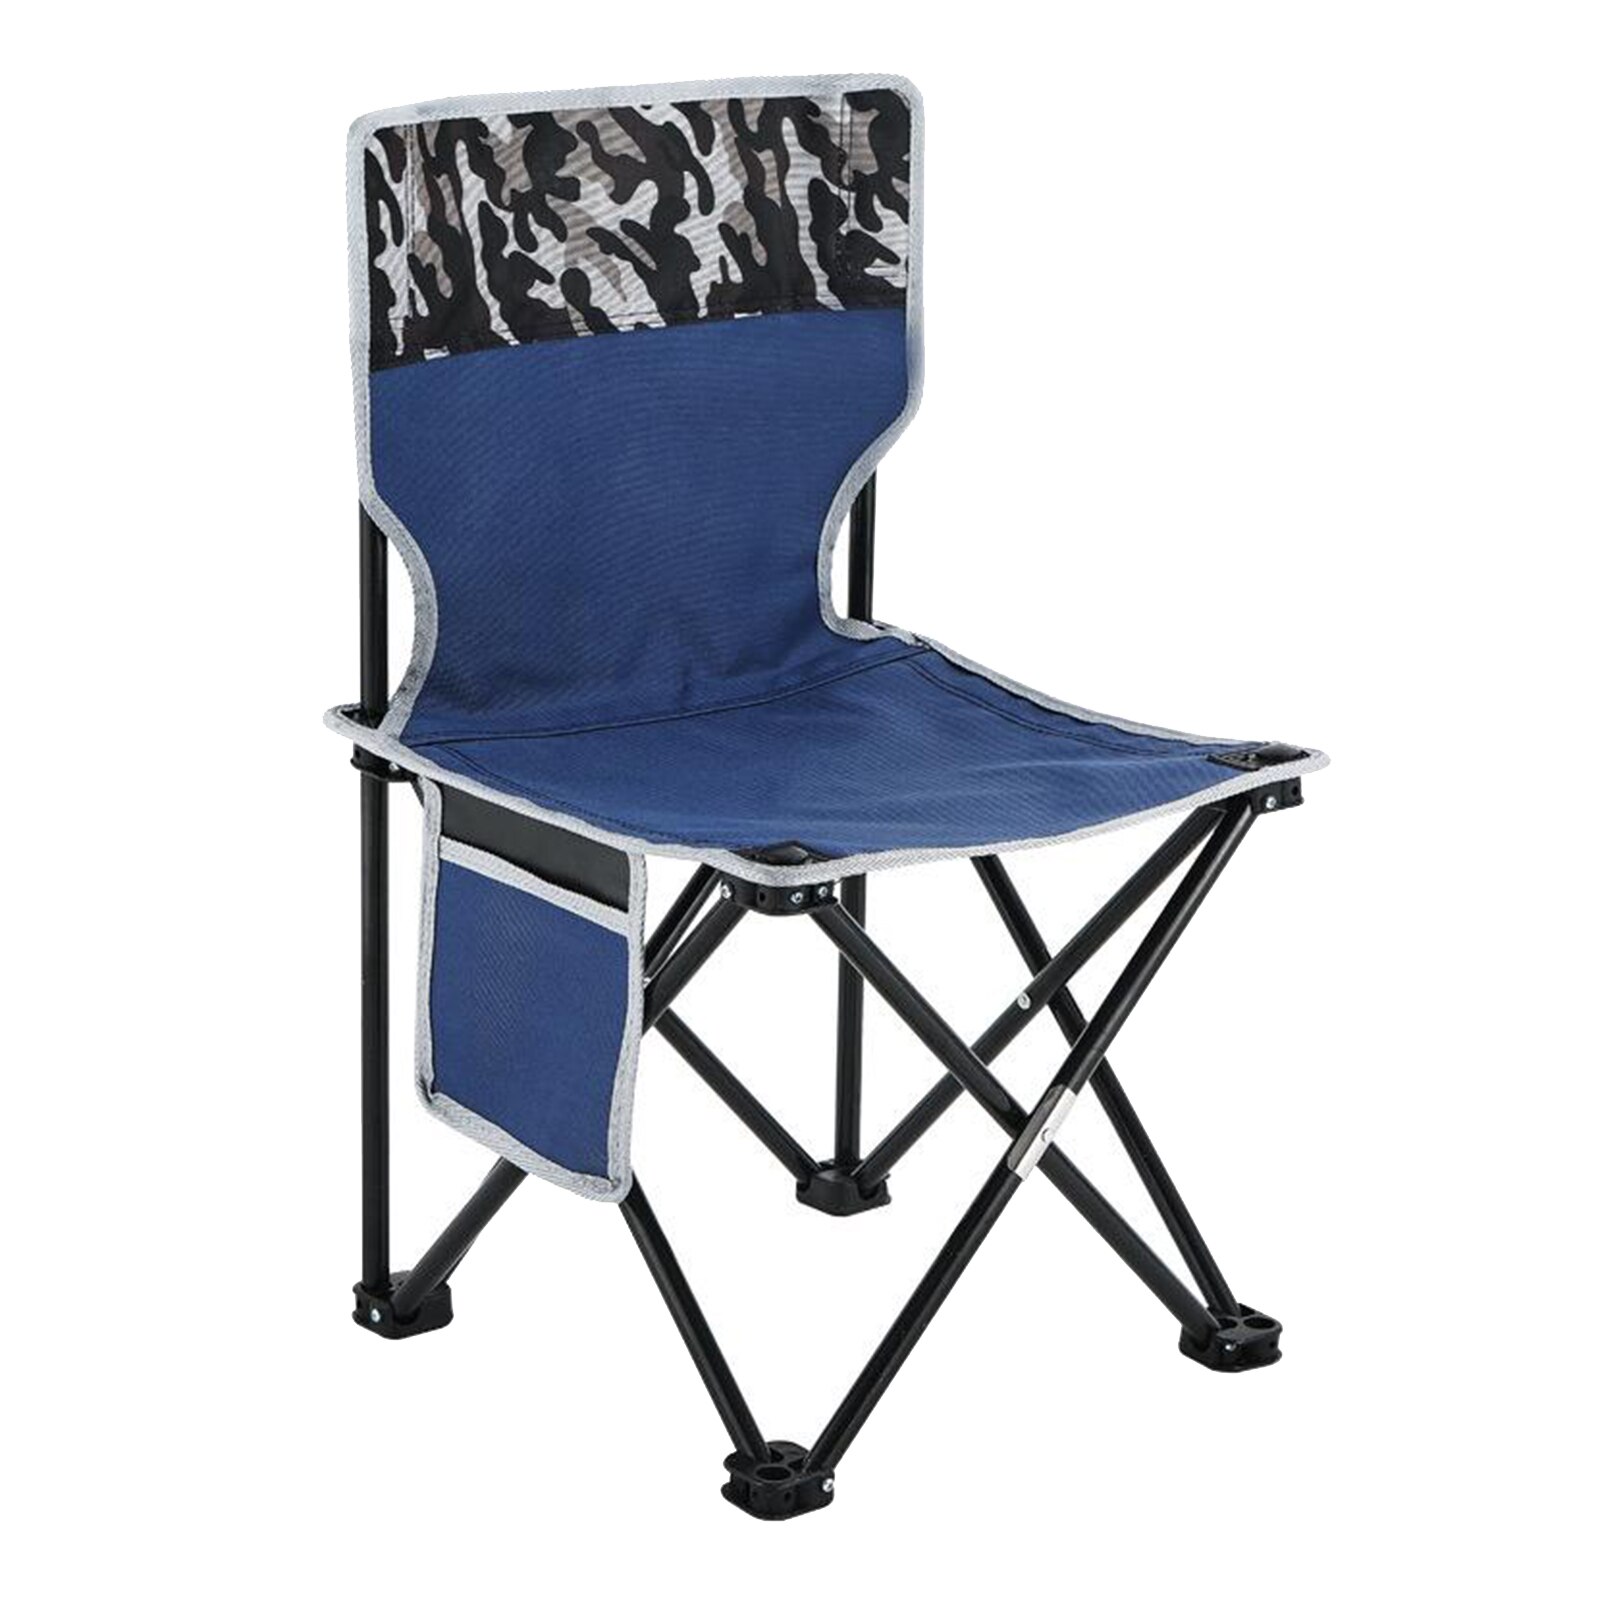 Reinforced Folding Camping Chairs, Foldable Lawn Picnic BBQ Picnic Backrest: Camo M